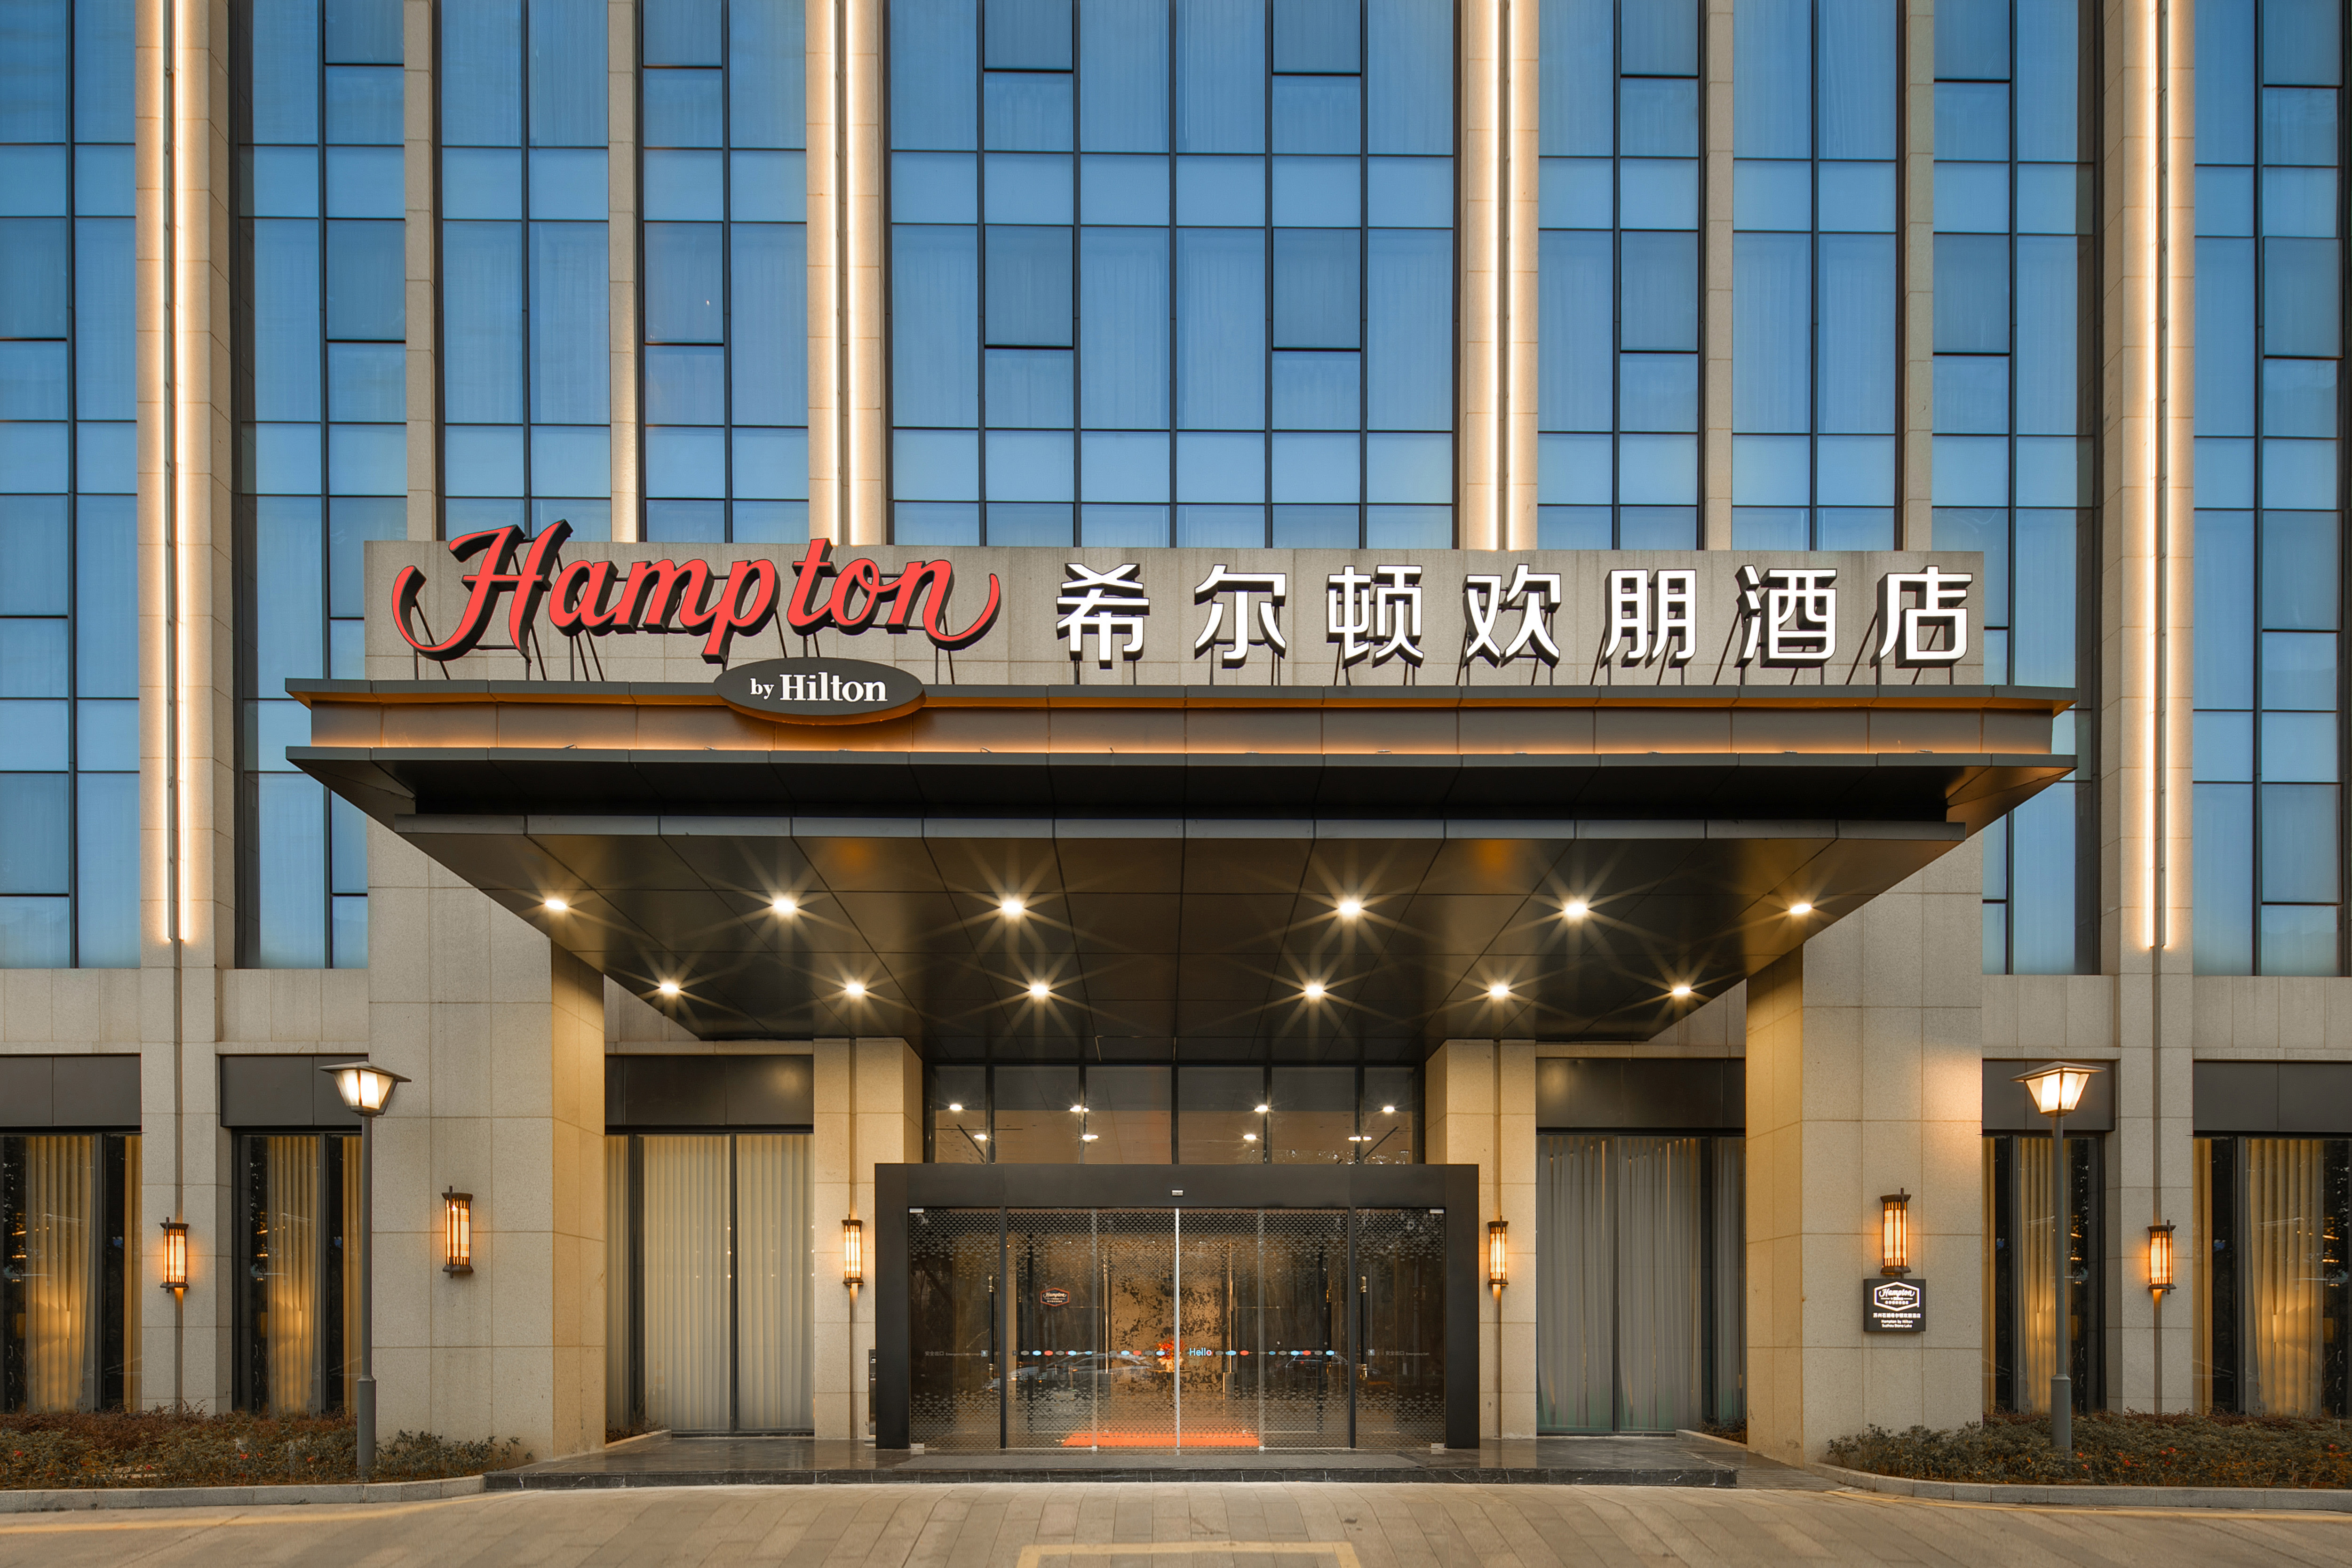 Hotel exterior with signage and entrance